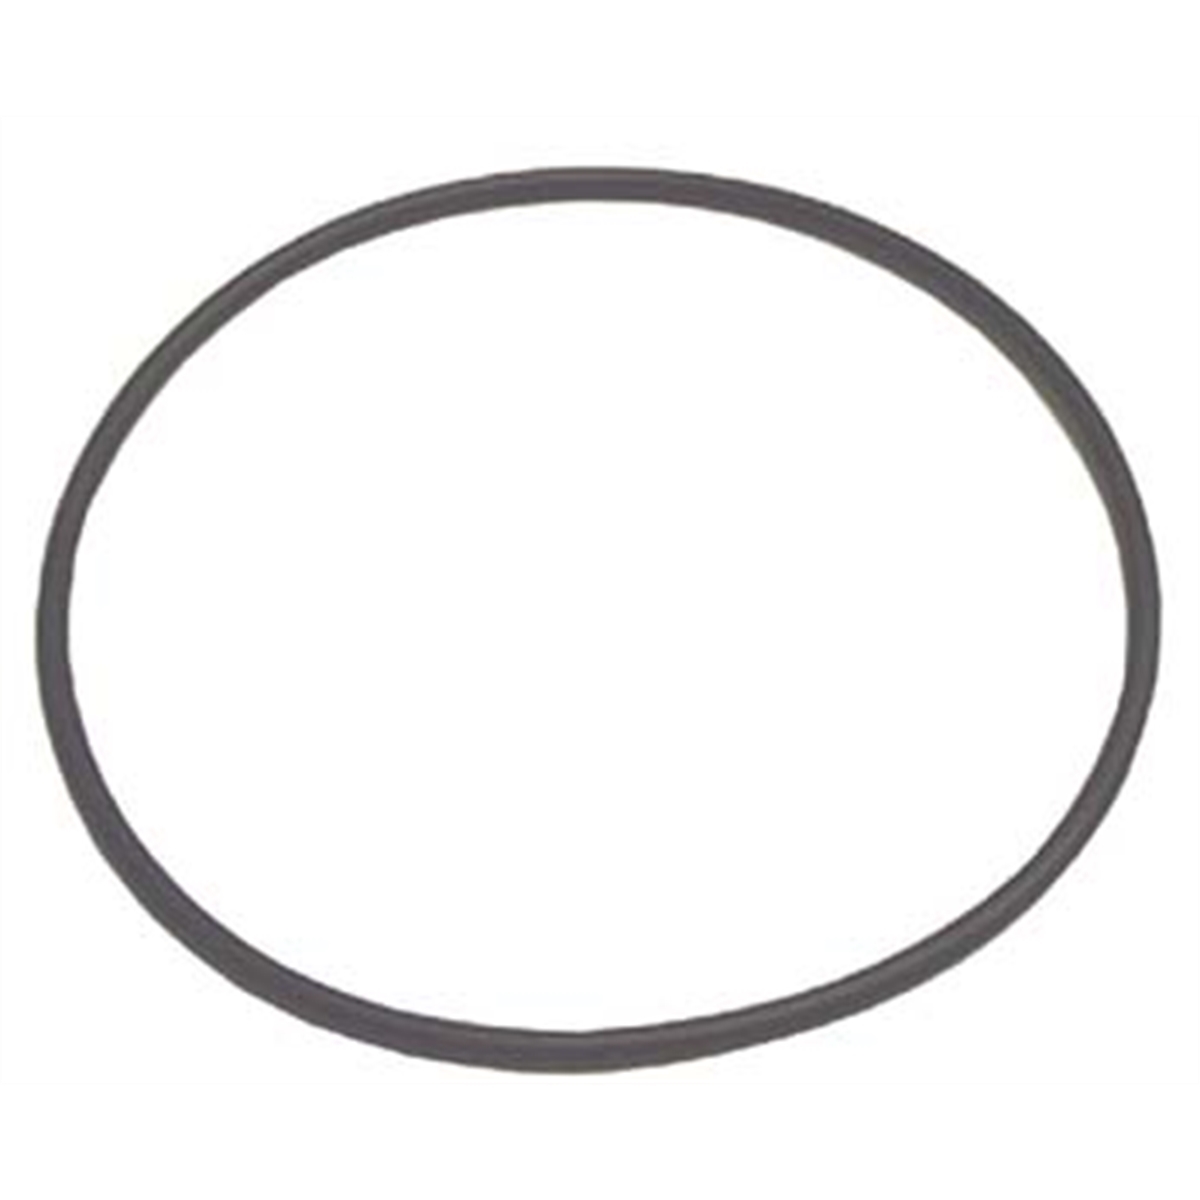 LARGE O-RING FOR TC 182034 ROTARY COUPLING ASSBLY